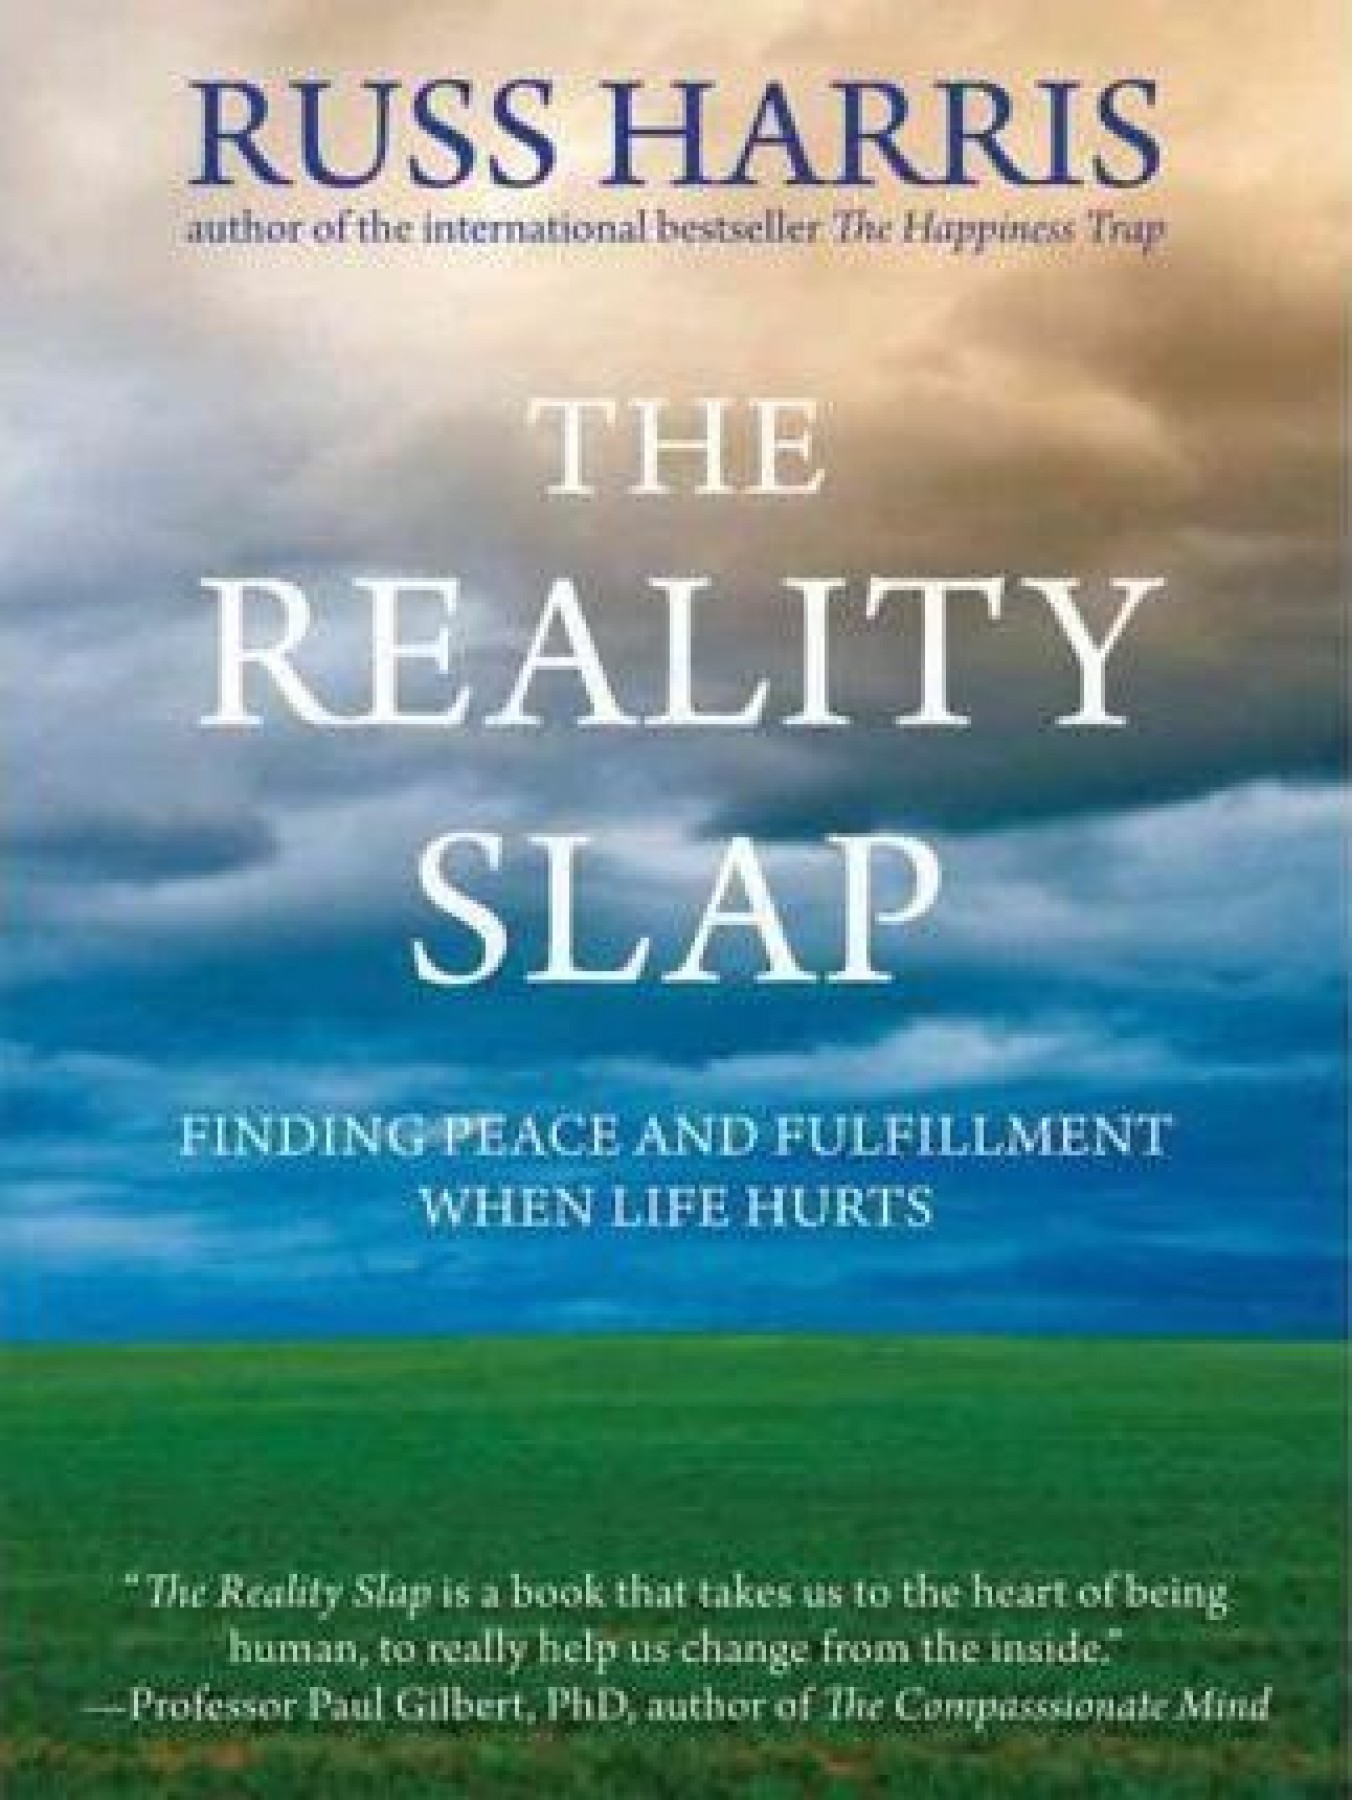 The Reality Slap: Finding peace and fulfillment when life hurts